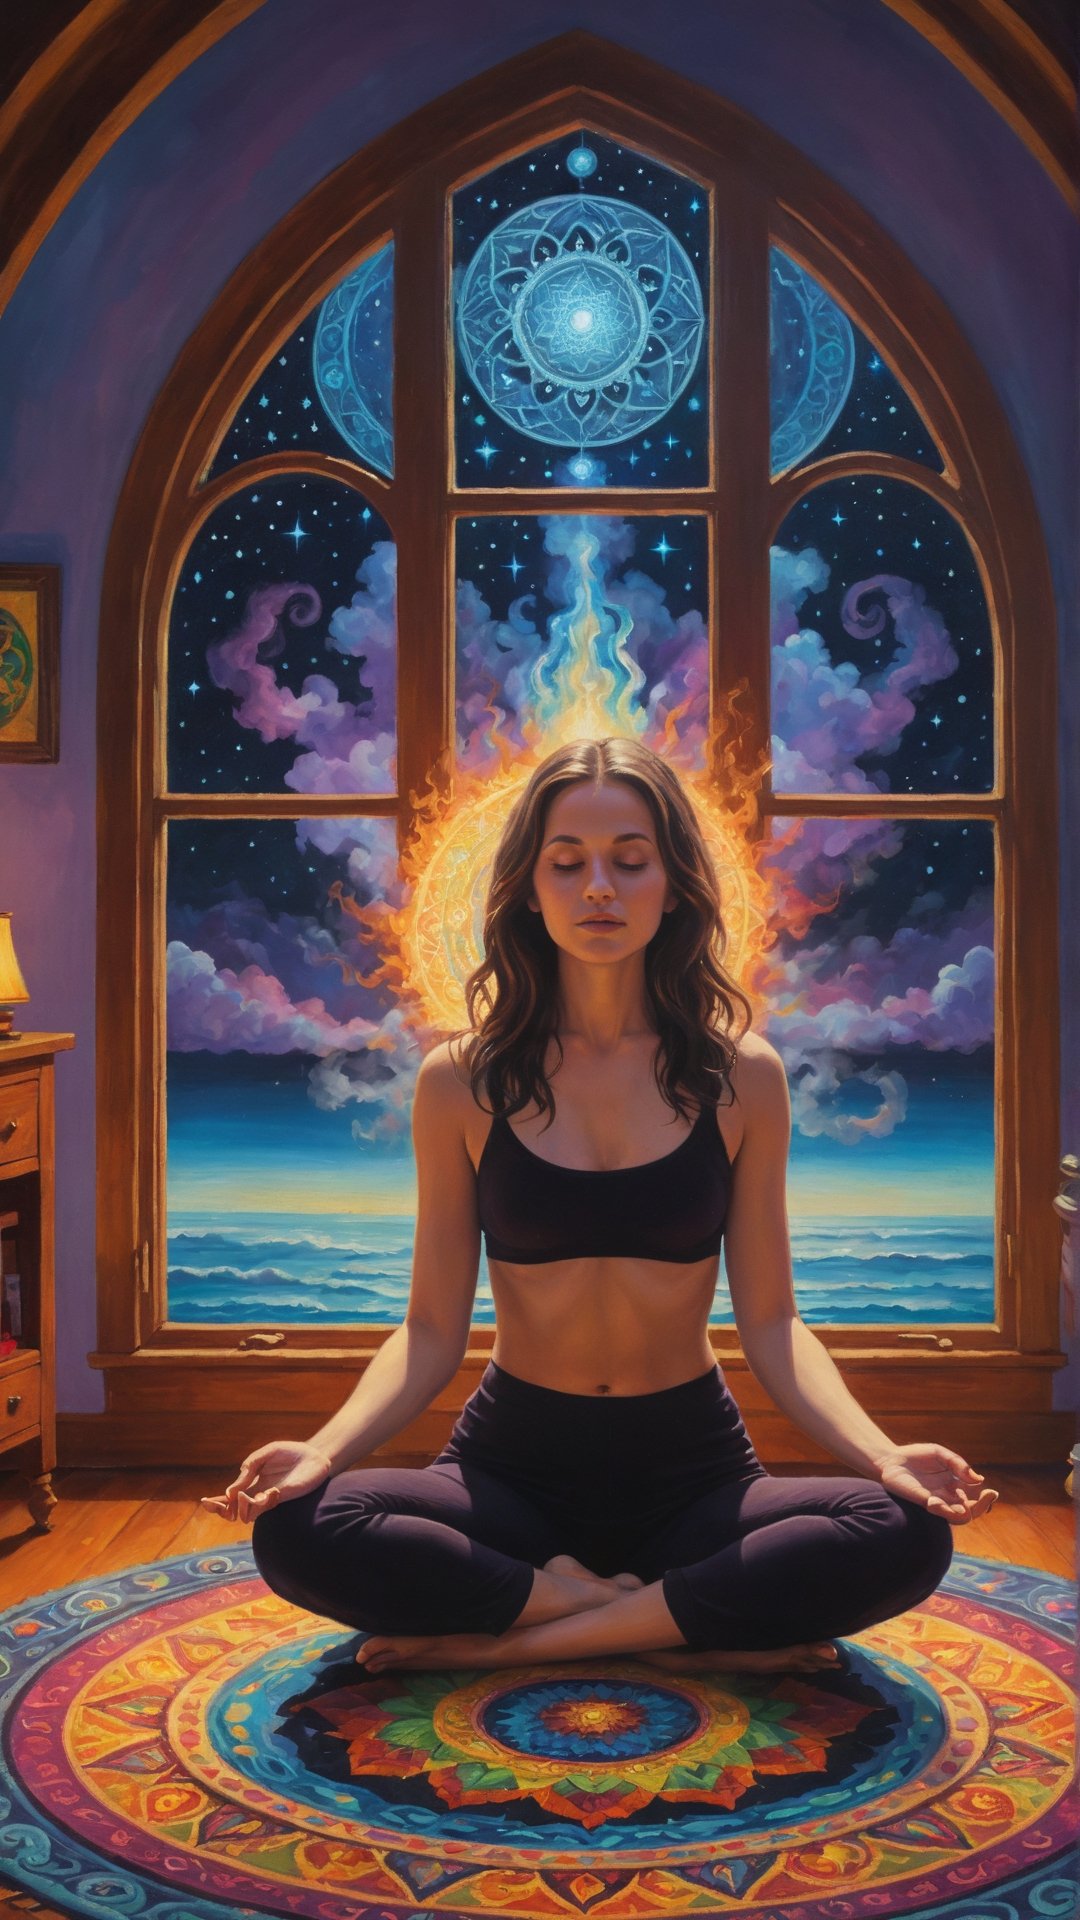 detailed art, oil painting, Handpainted.

Gothic Girl meditating in her room becoming the universe  , sitting in the center of her room on a rug that has a mandala printed on it, meditation pose (non-sexual vibes), dreaming lucid things, night lights, psicodélic Beach Through the window, Pallete ColorTheme, psychedelic vibes, Pastel Hues, Hand Painted, ((incense generating a thin line of smoke)).